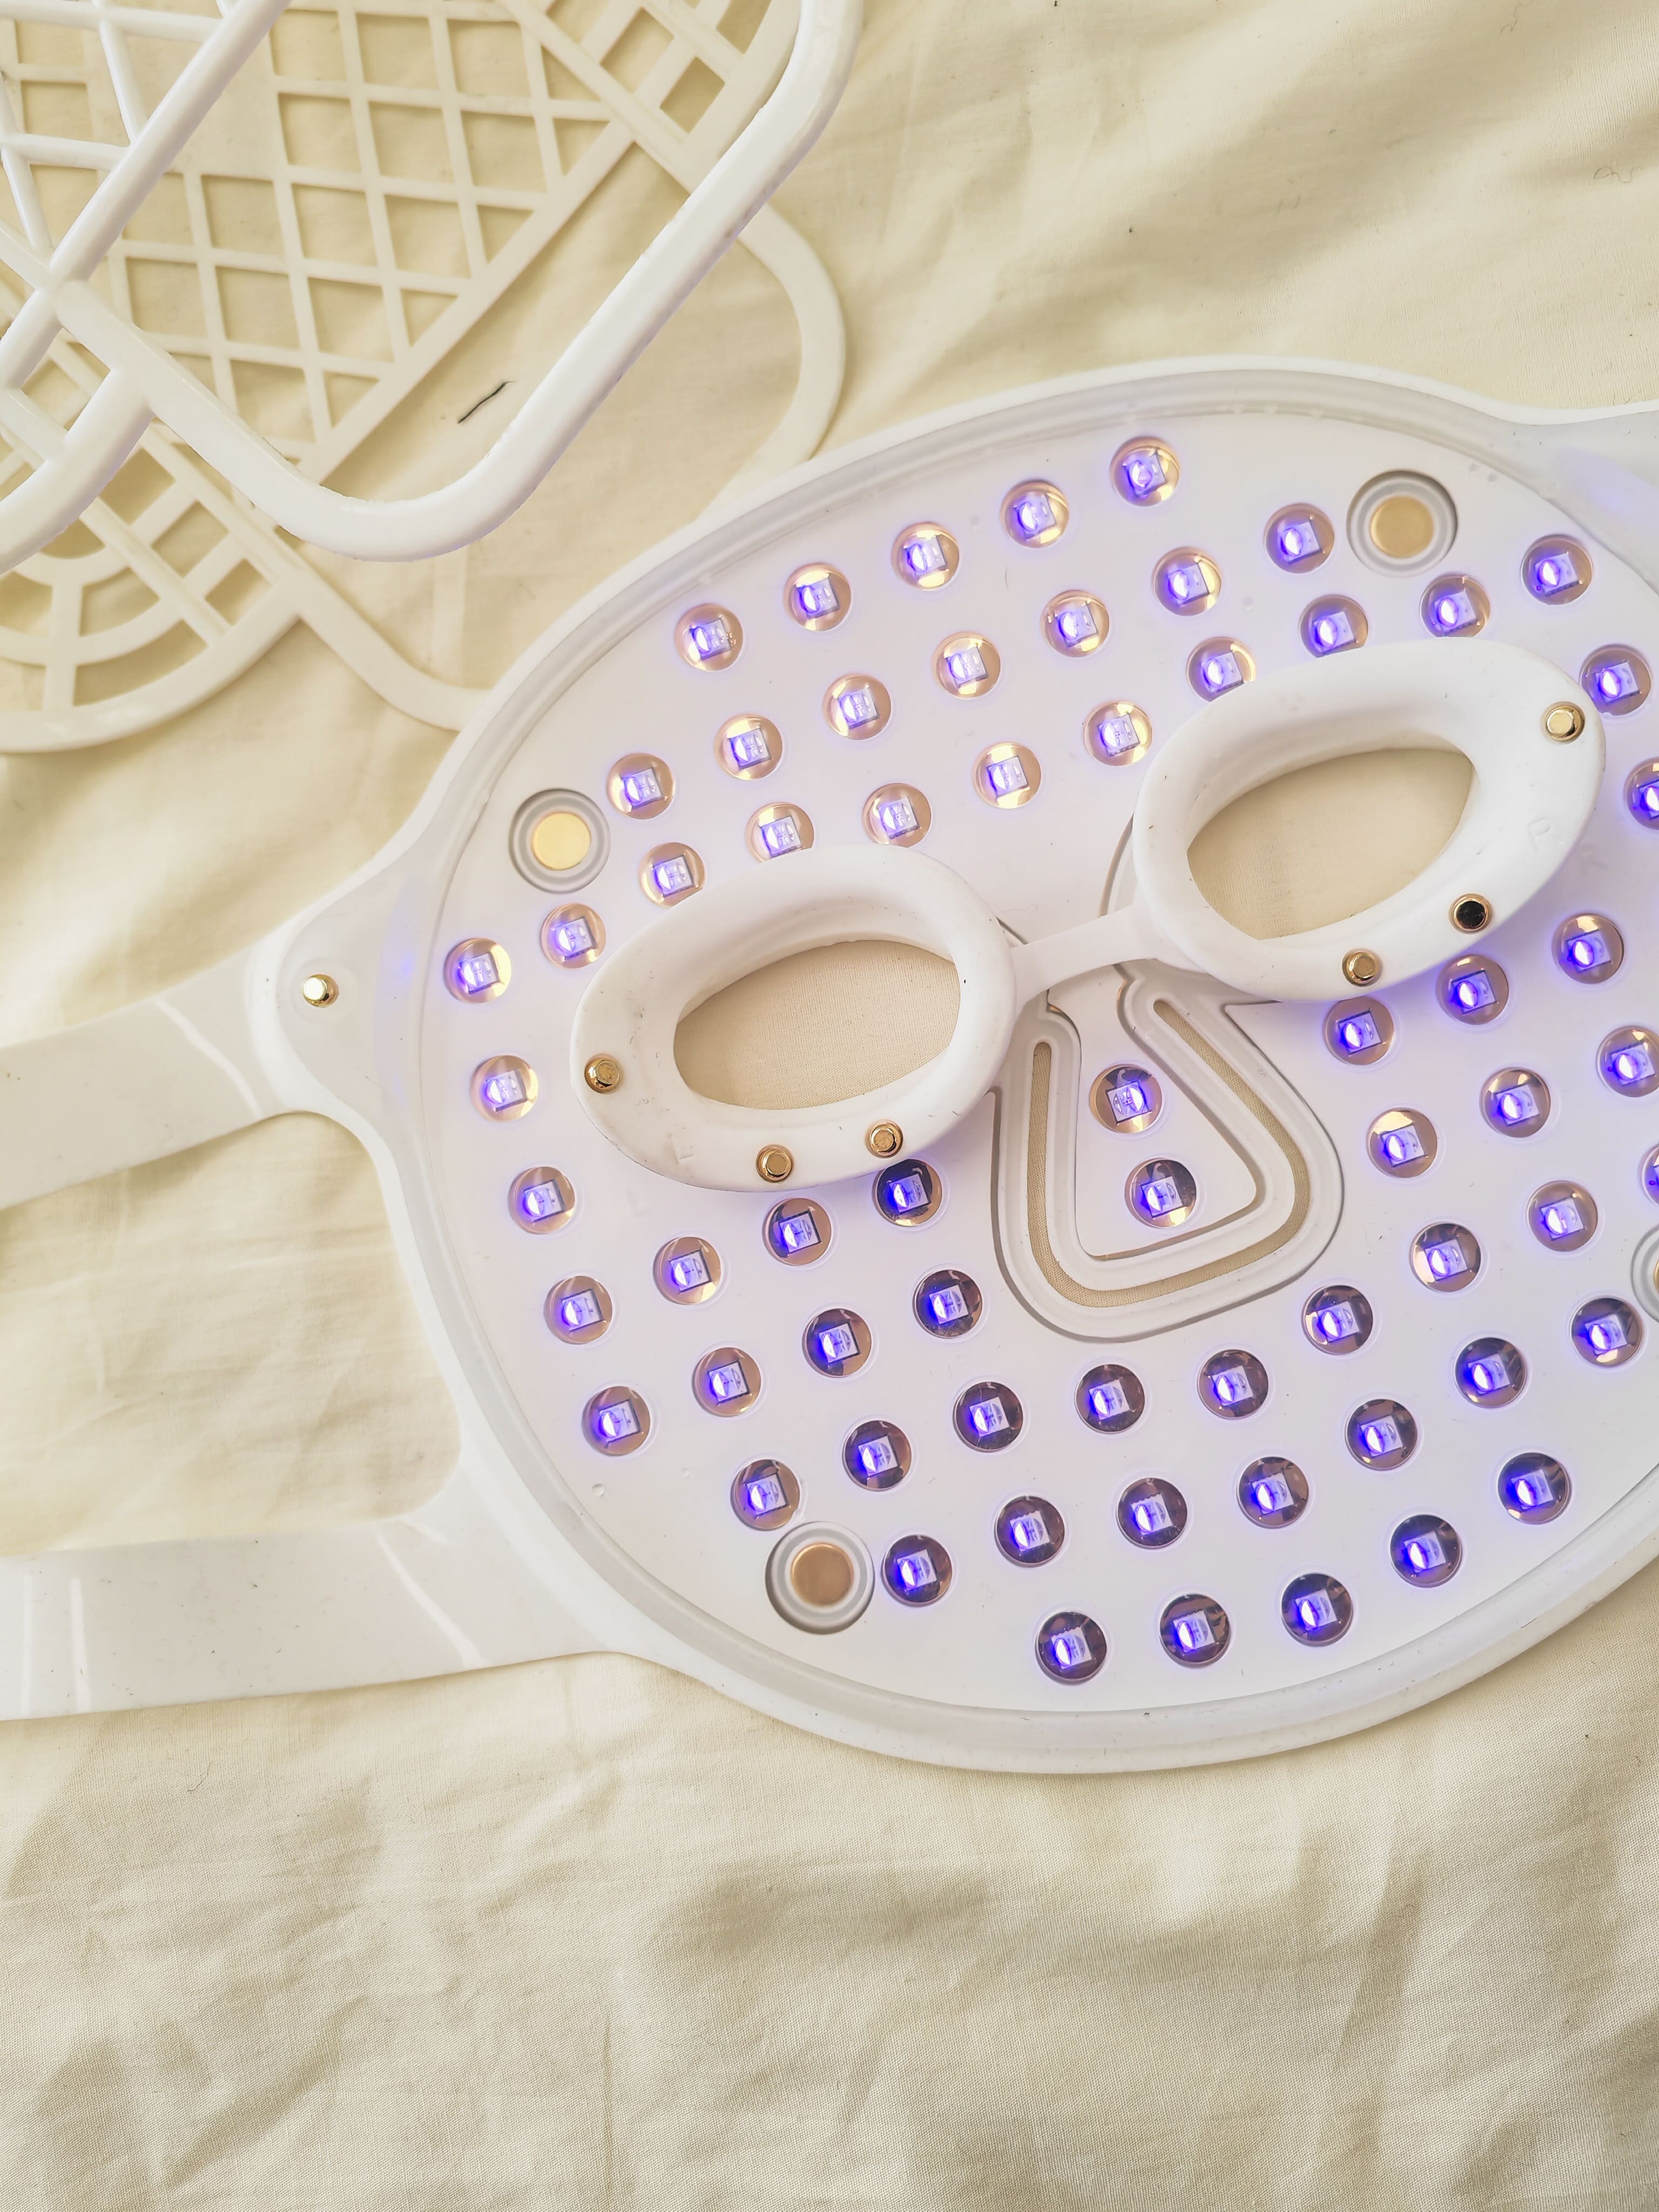 What is a Light Therapy Mask? And How Does Light Therapy Mask Work